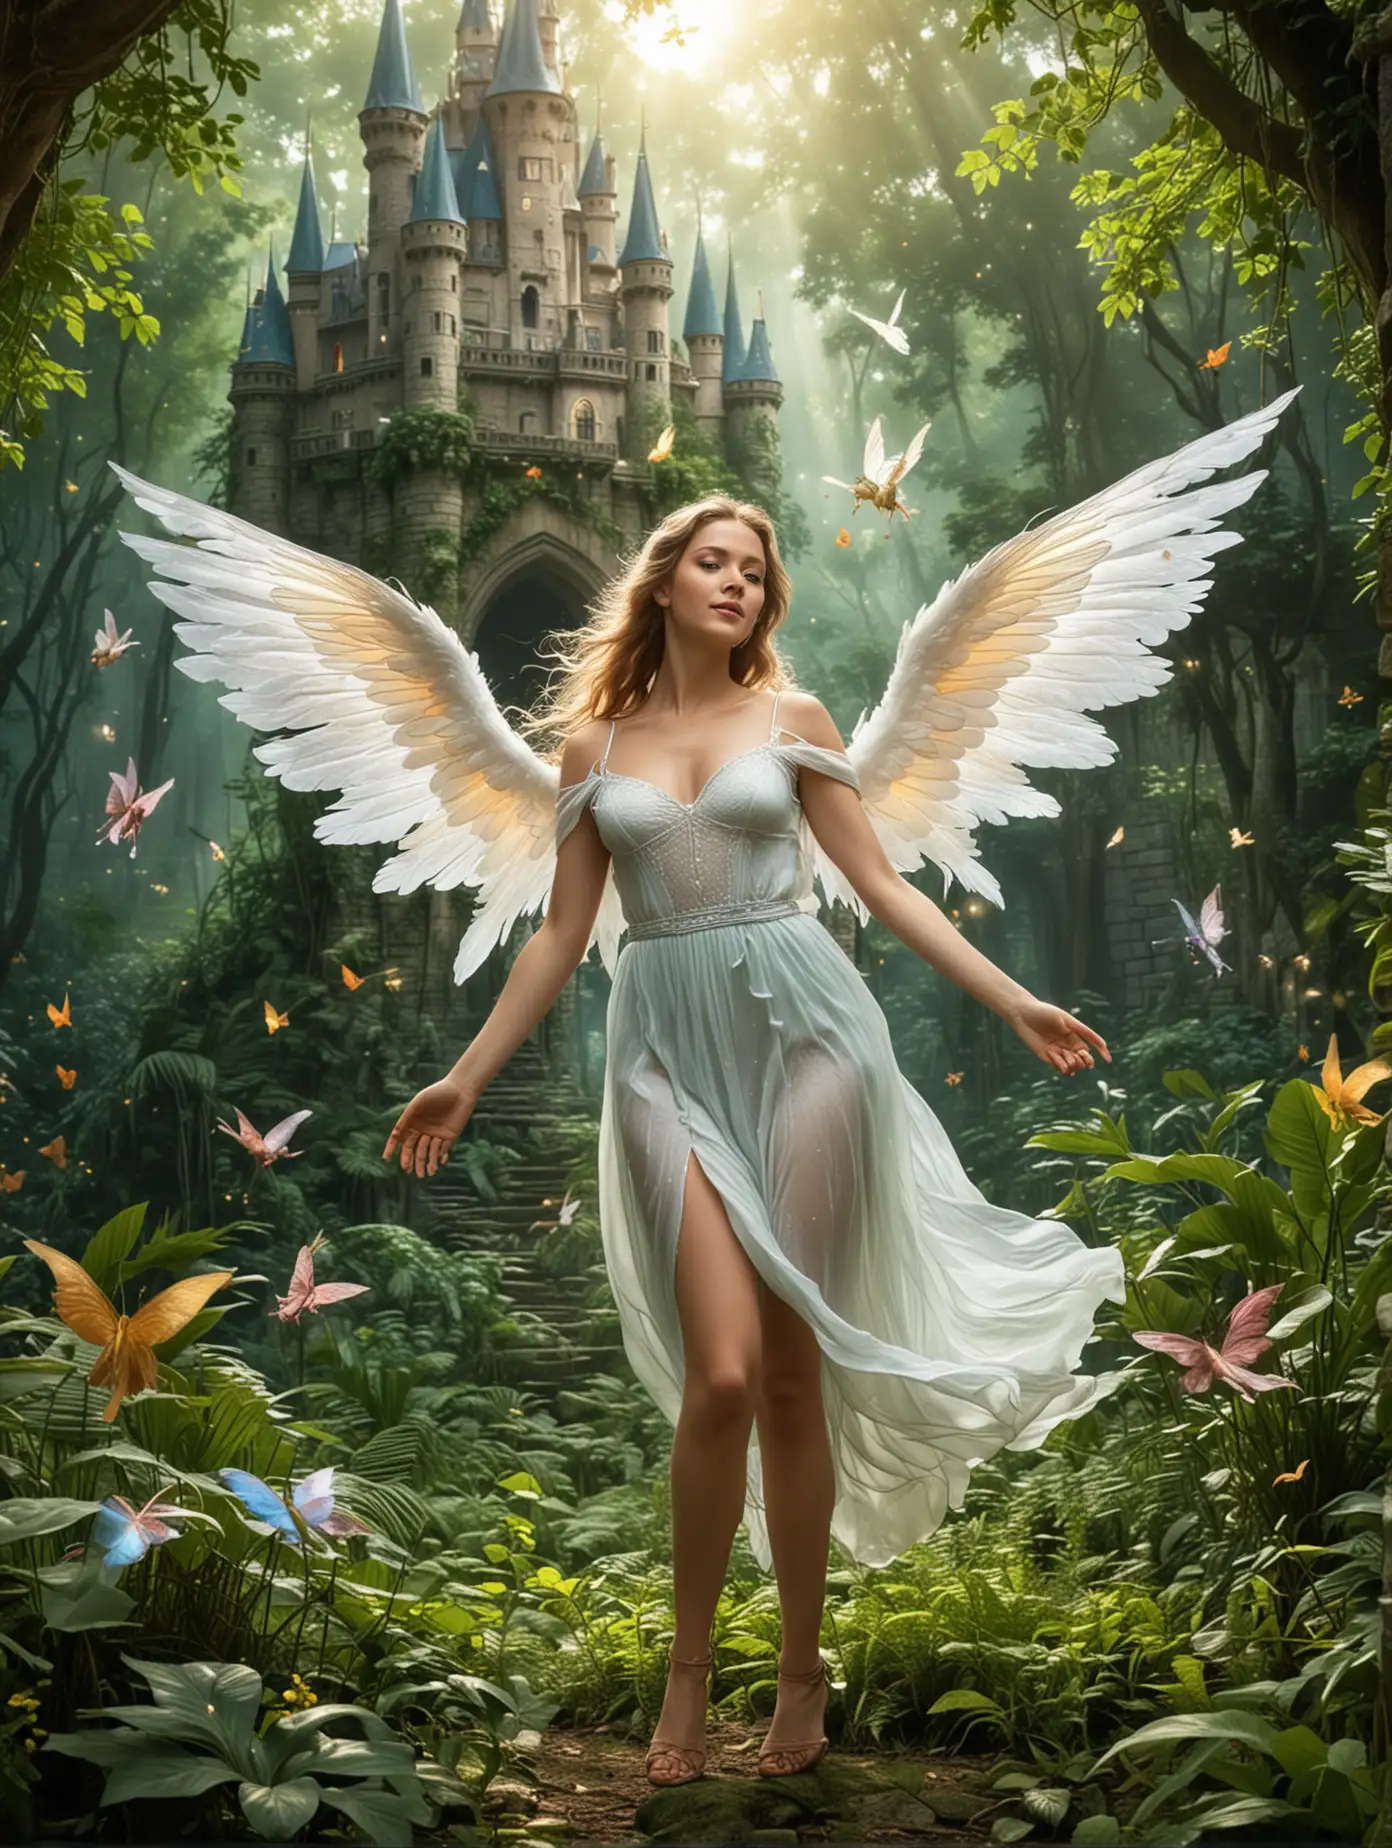 pretty angel parying with beautiful fairies flying around in jungle near castle